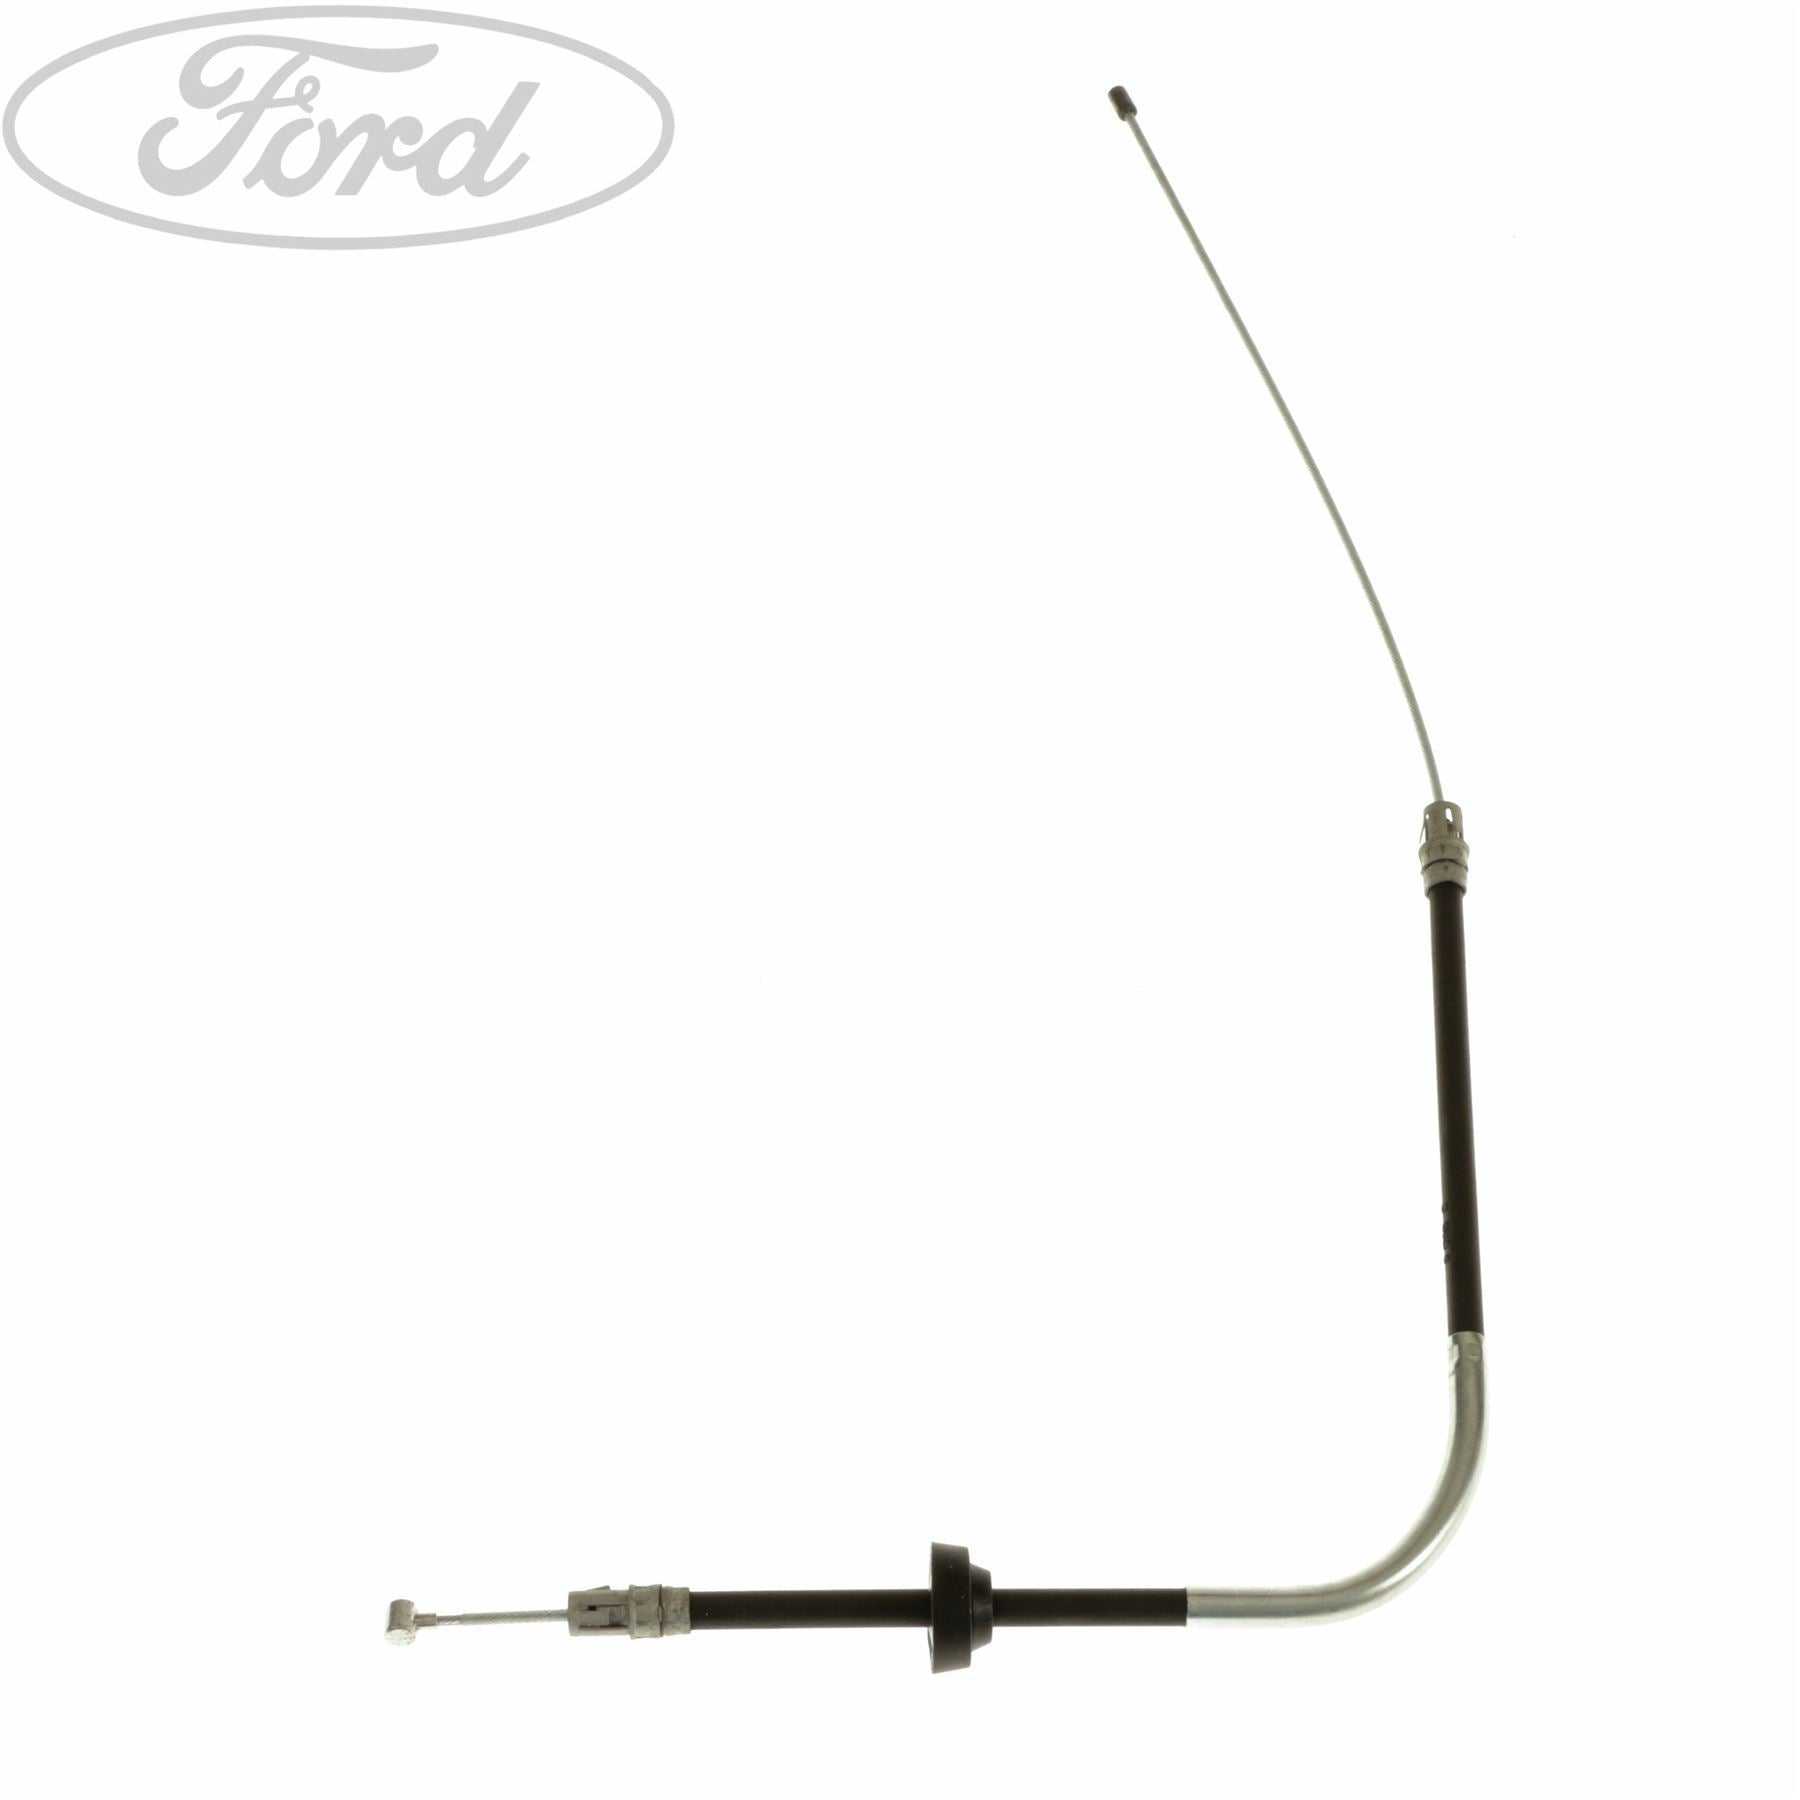 Ford, TRANSIT PARKING HAND BRAKE CABLE